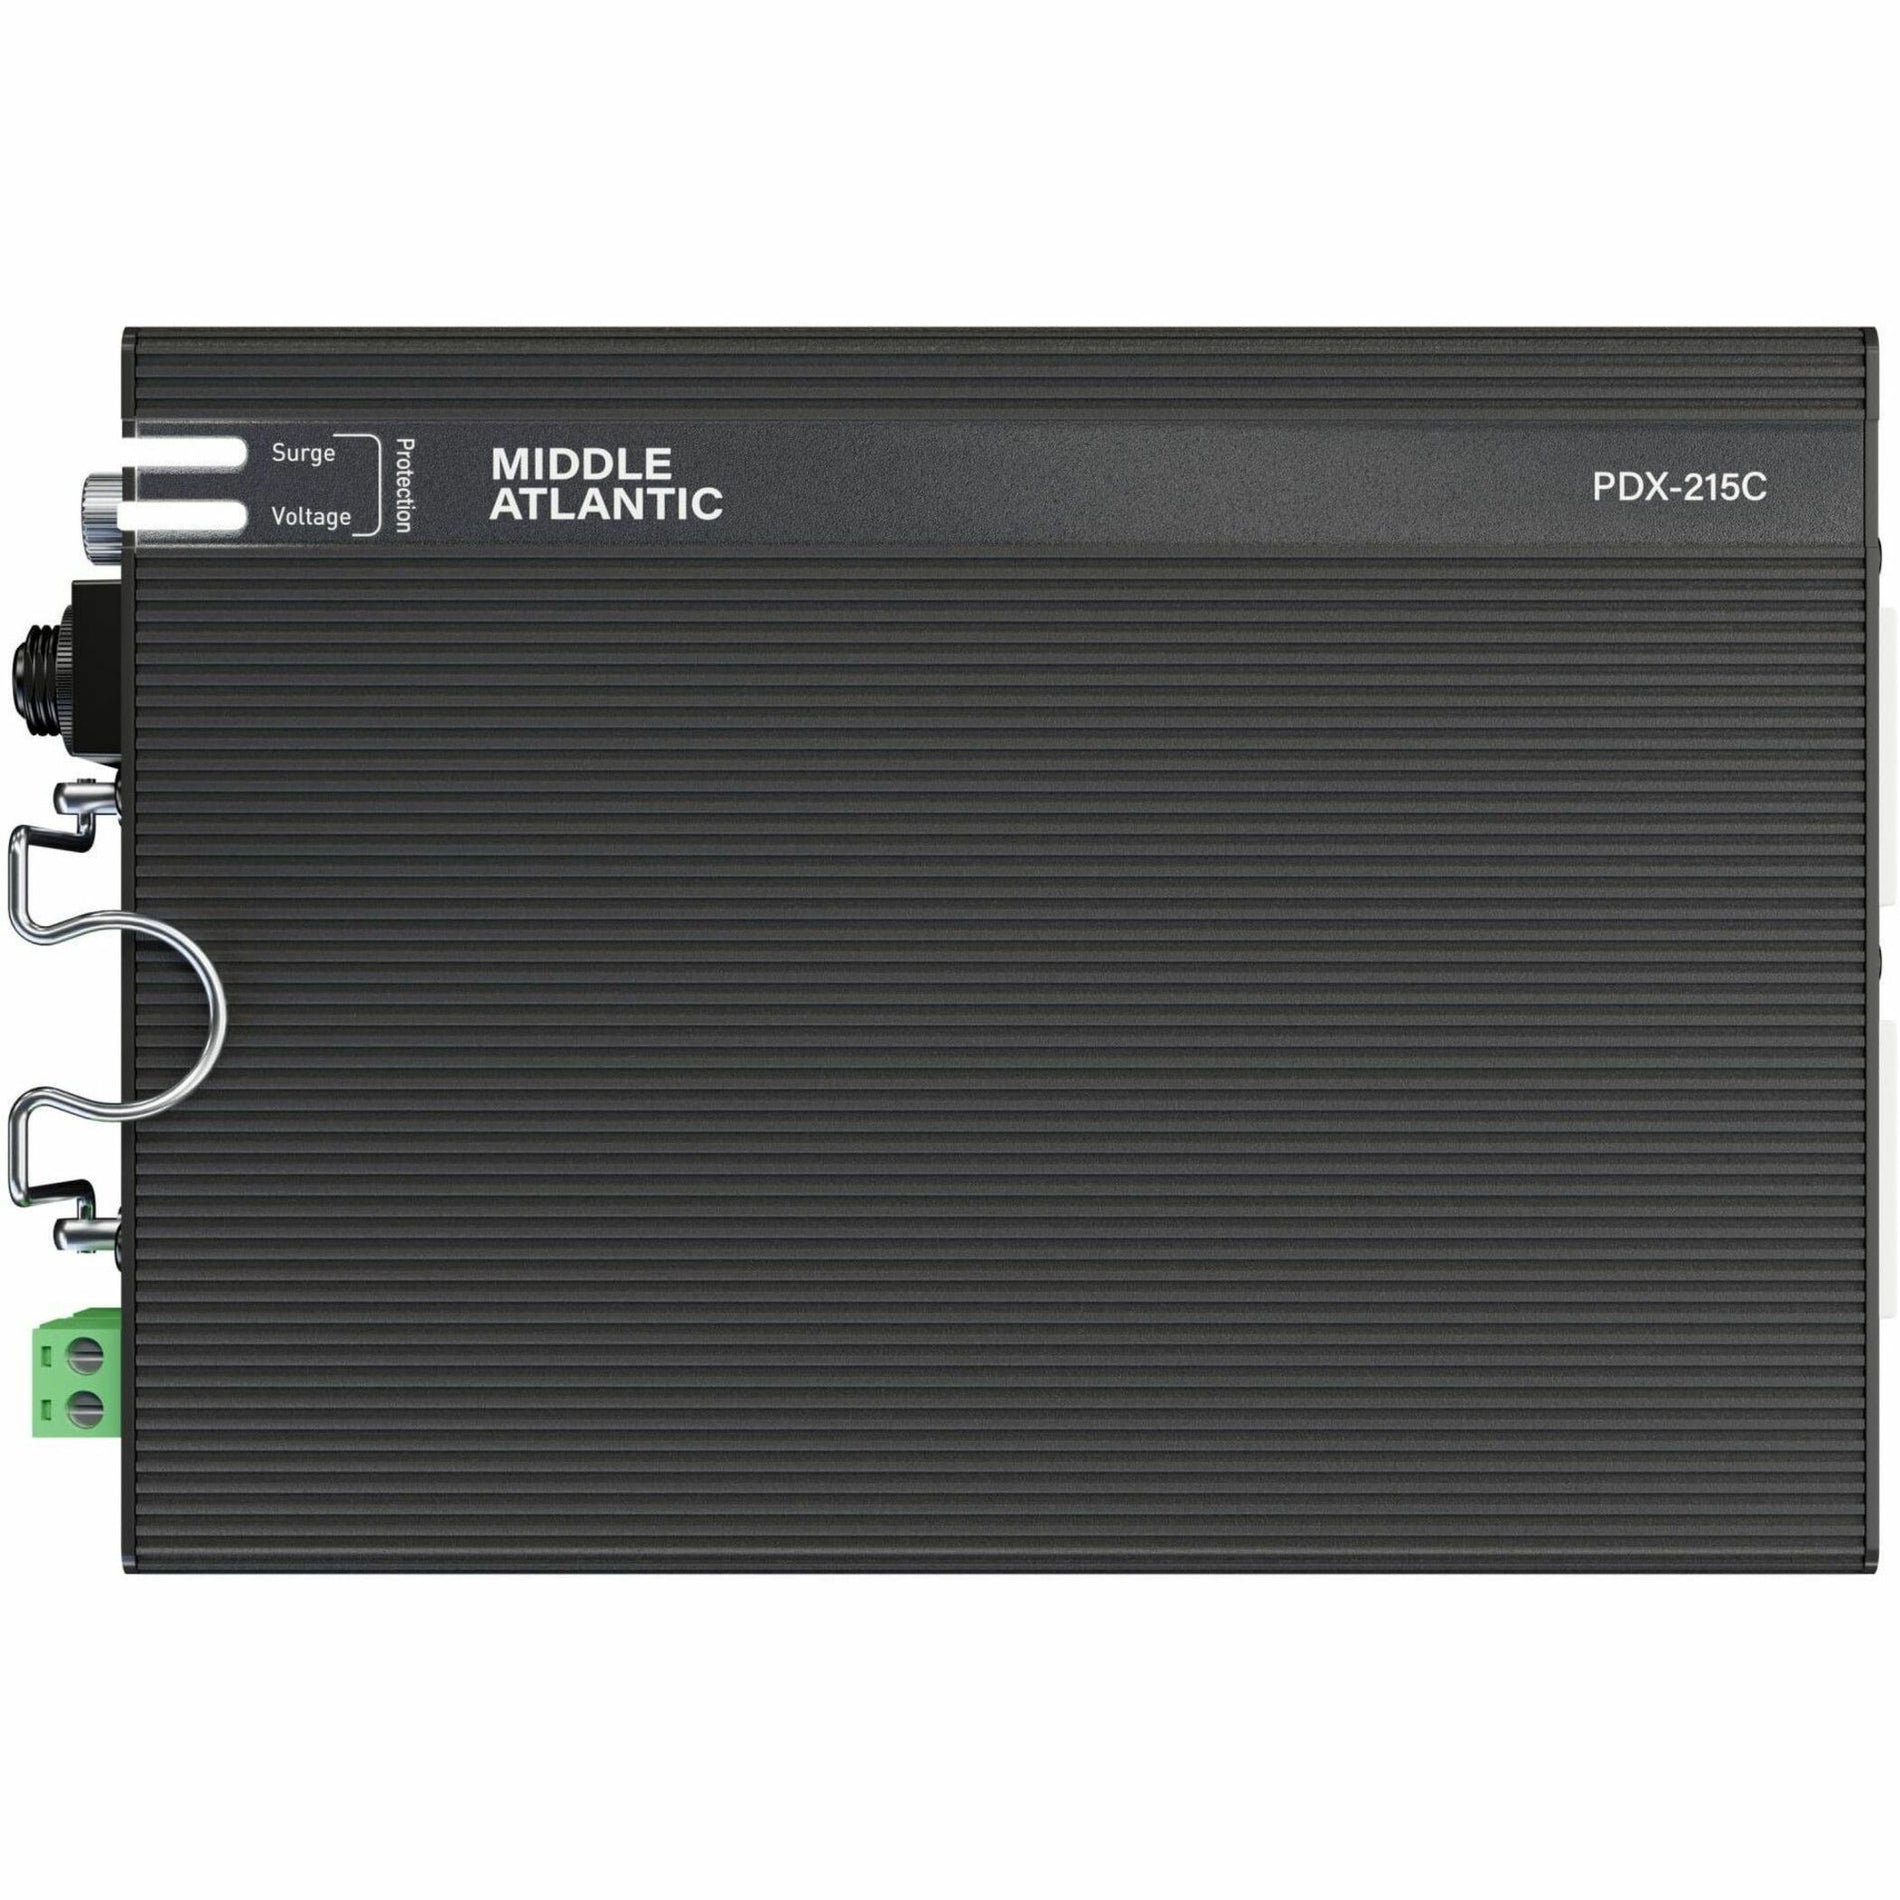 Middle Atlantic PDX-215C NEXSYS Compact Power Multi-Stage Surge Protection PDU, 15A, 120V AC